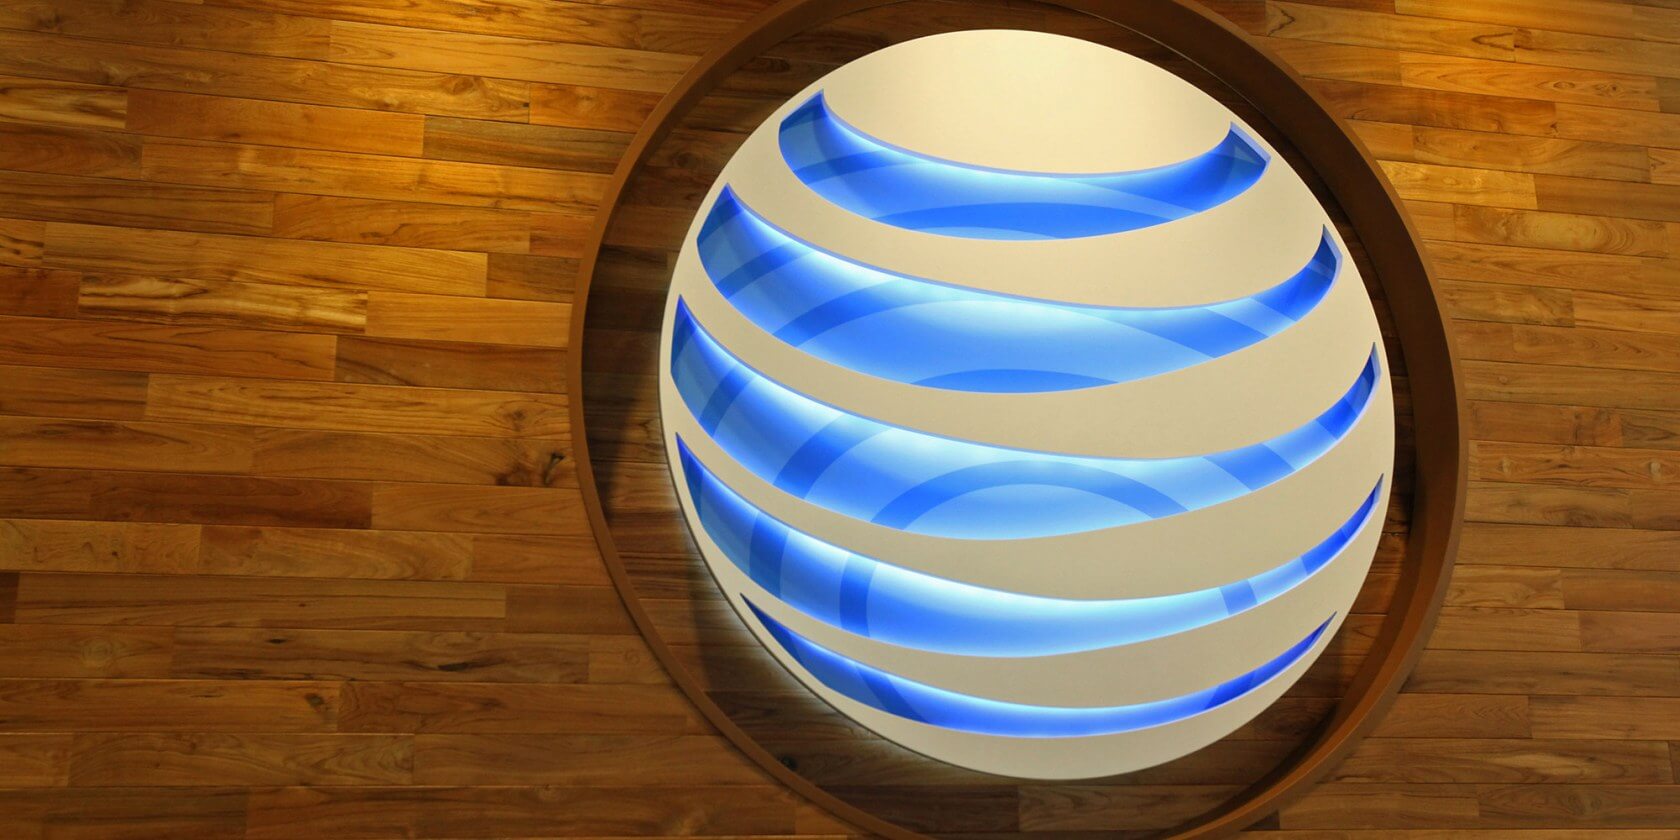 Hackers accessed personal data from 9 million AT&T customers